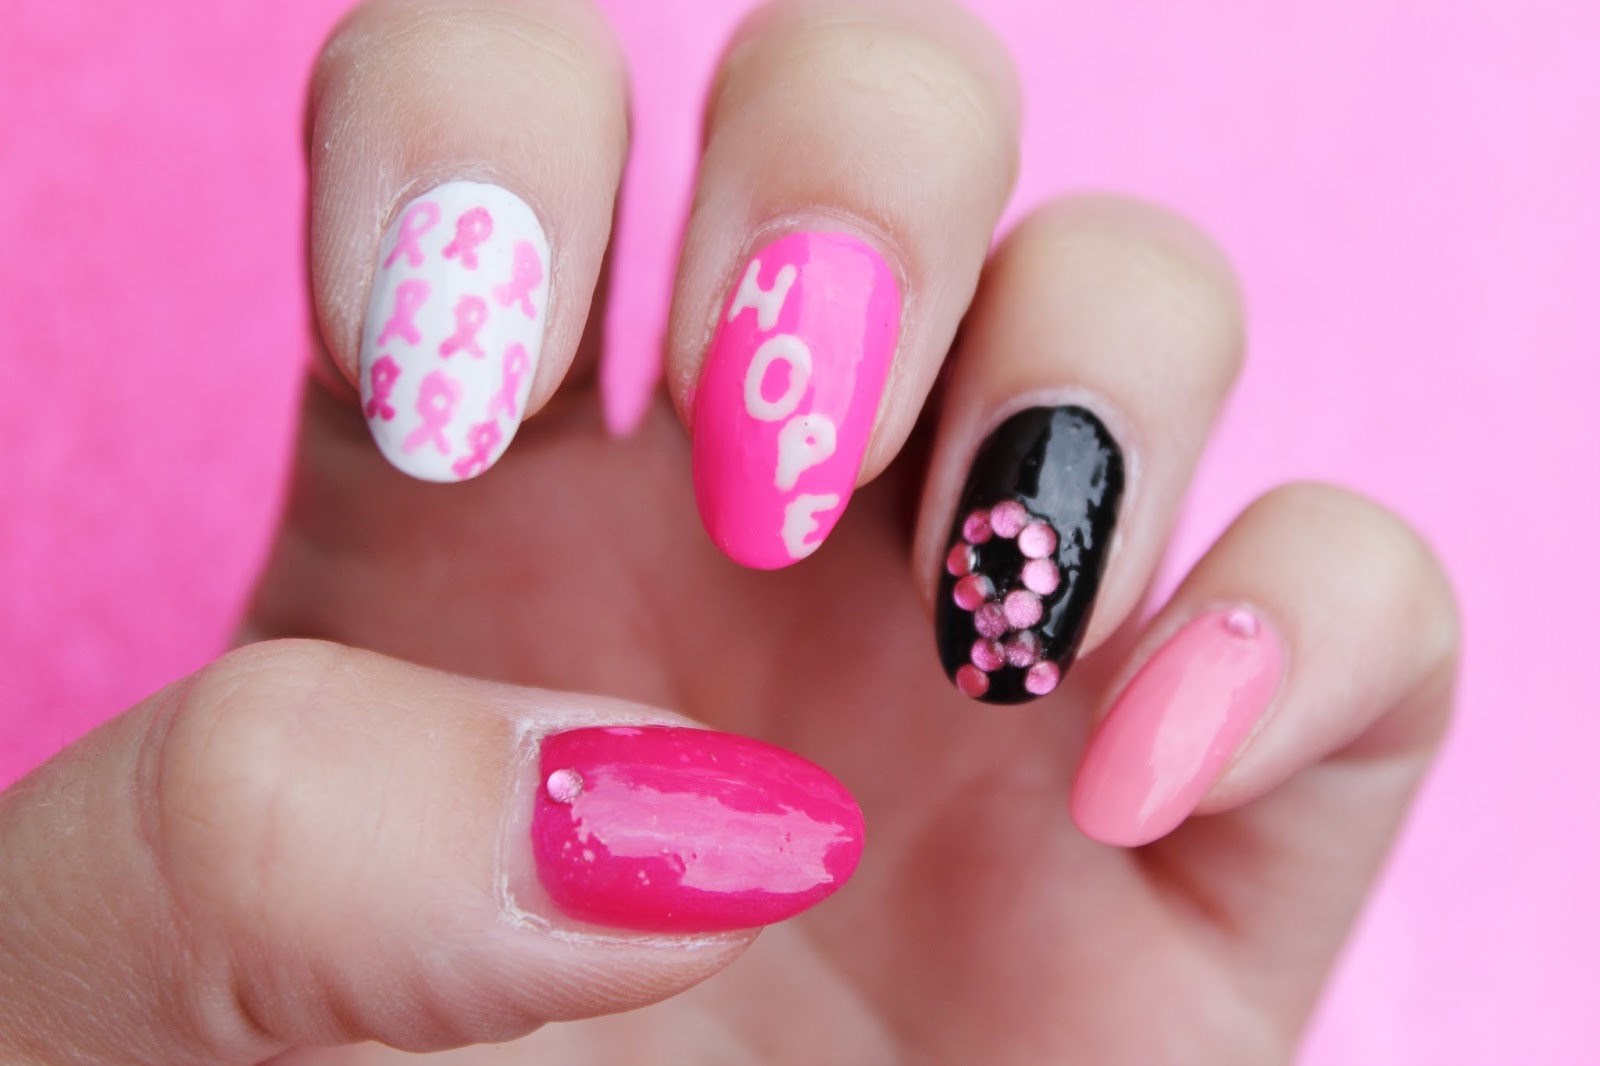 2. Breast Cancer Awareness Nail Art - wide 10